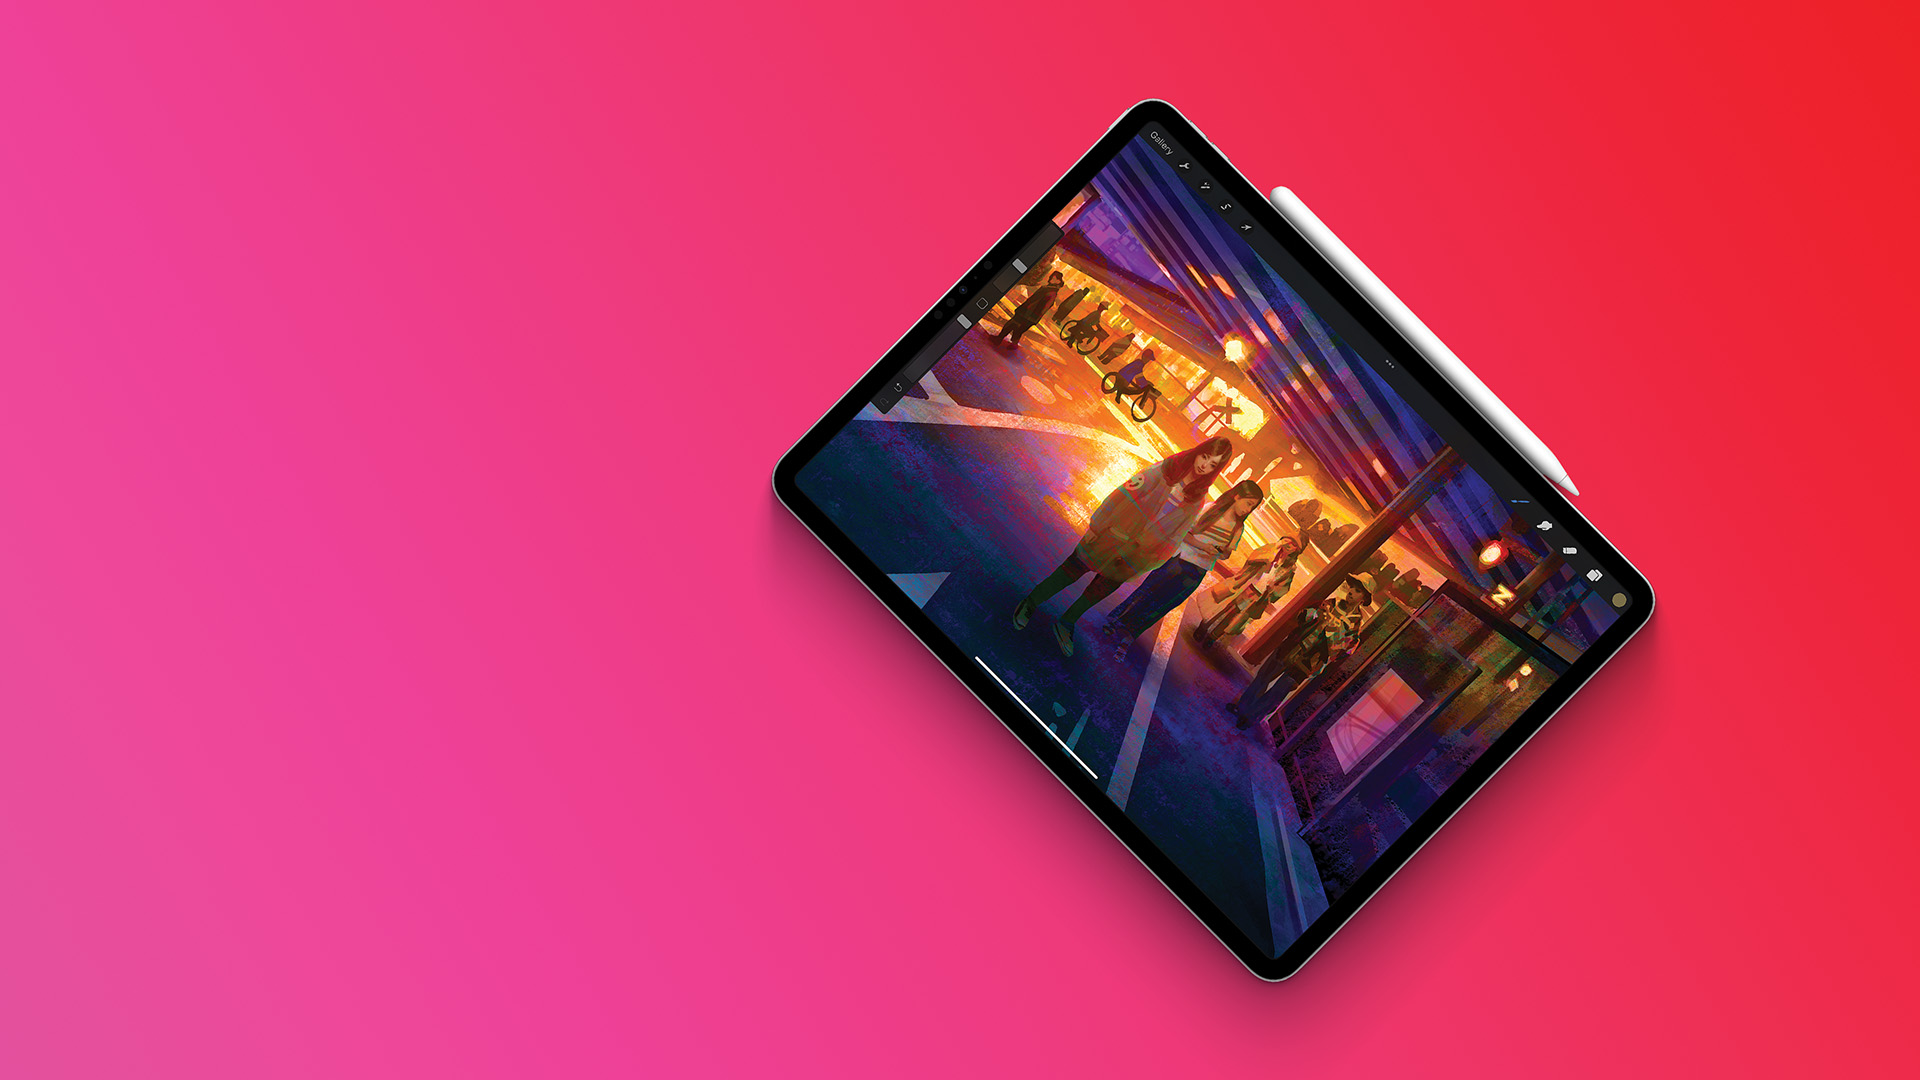 IPad Pro M2 Brings With It A Magical Tablet Experience